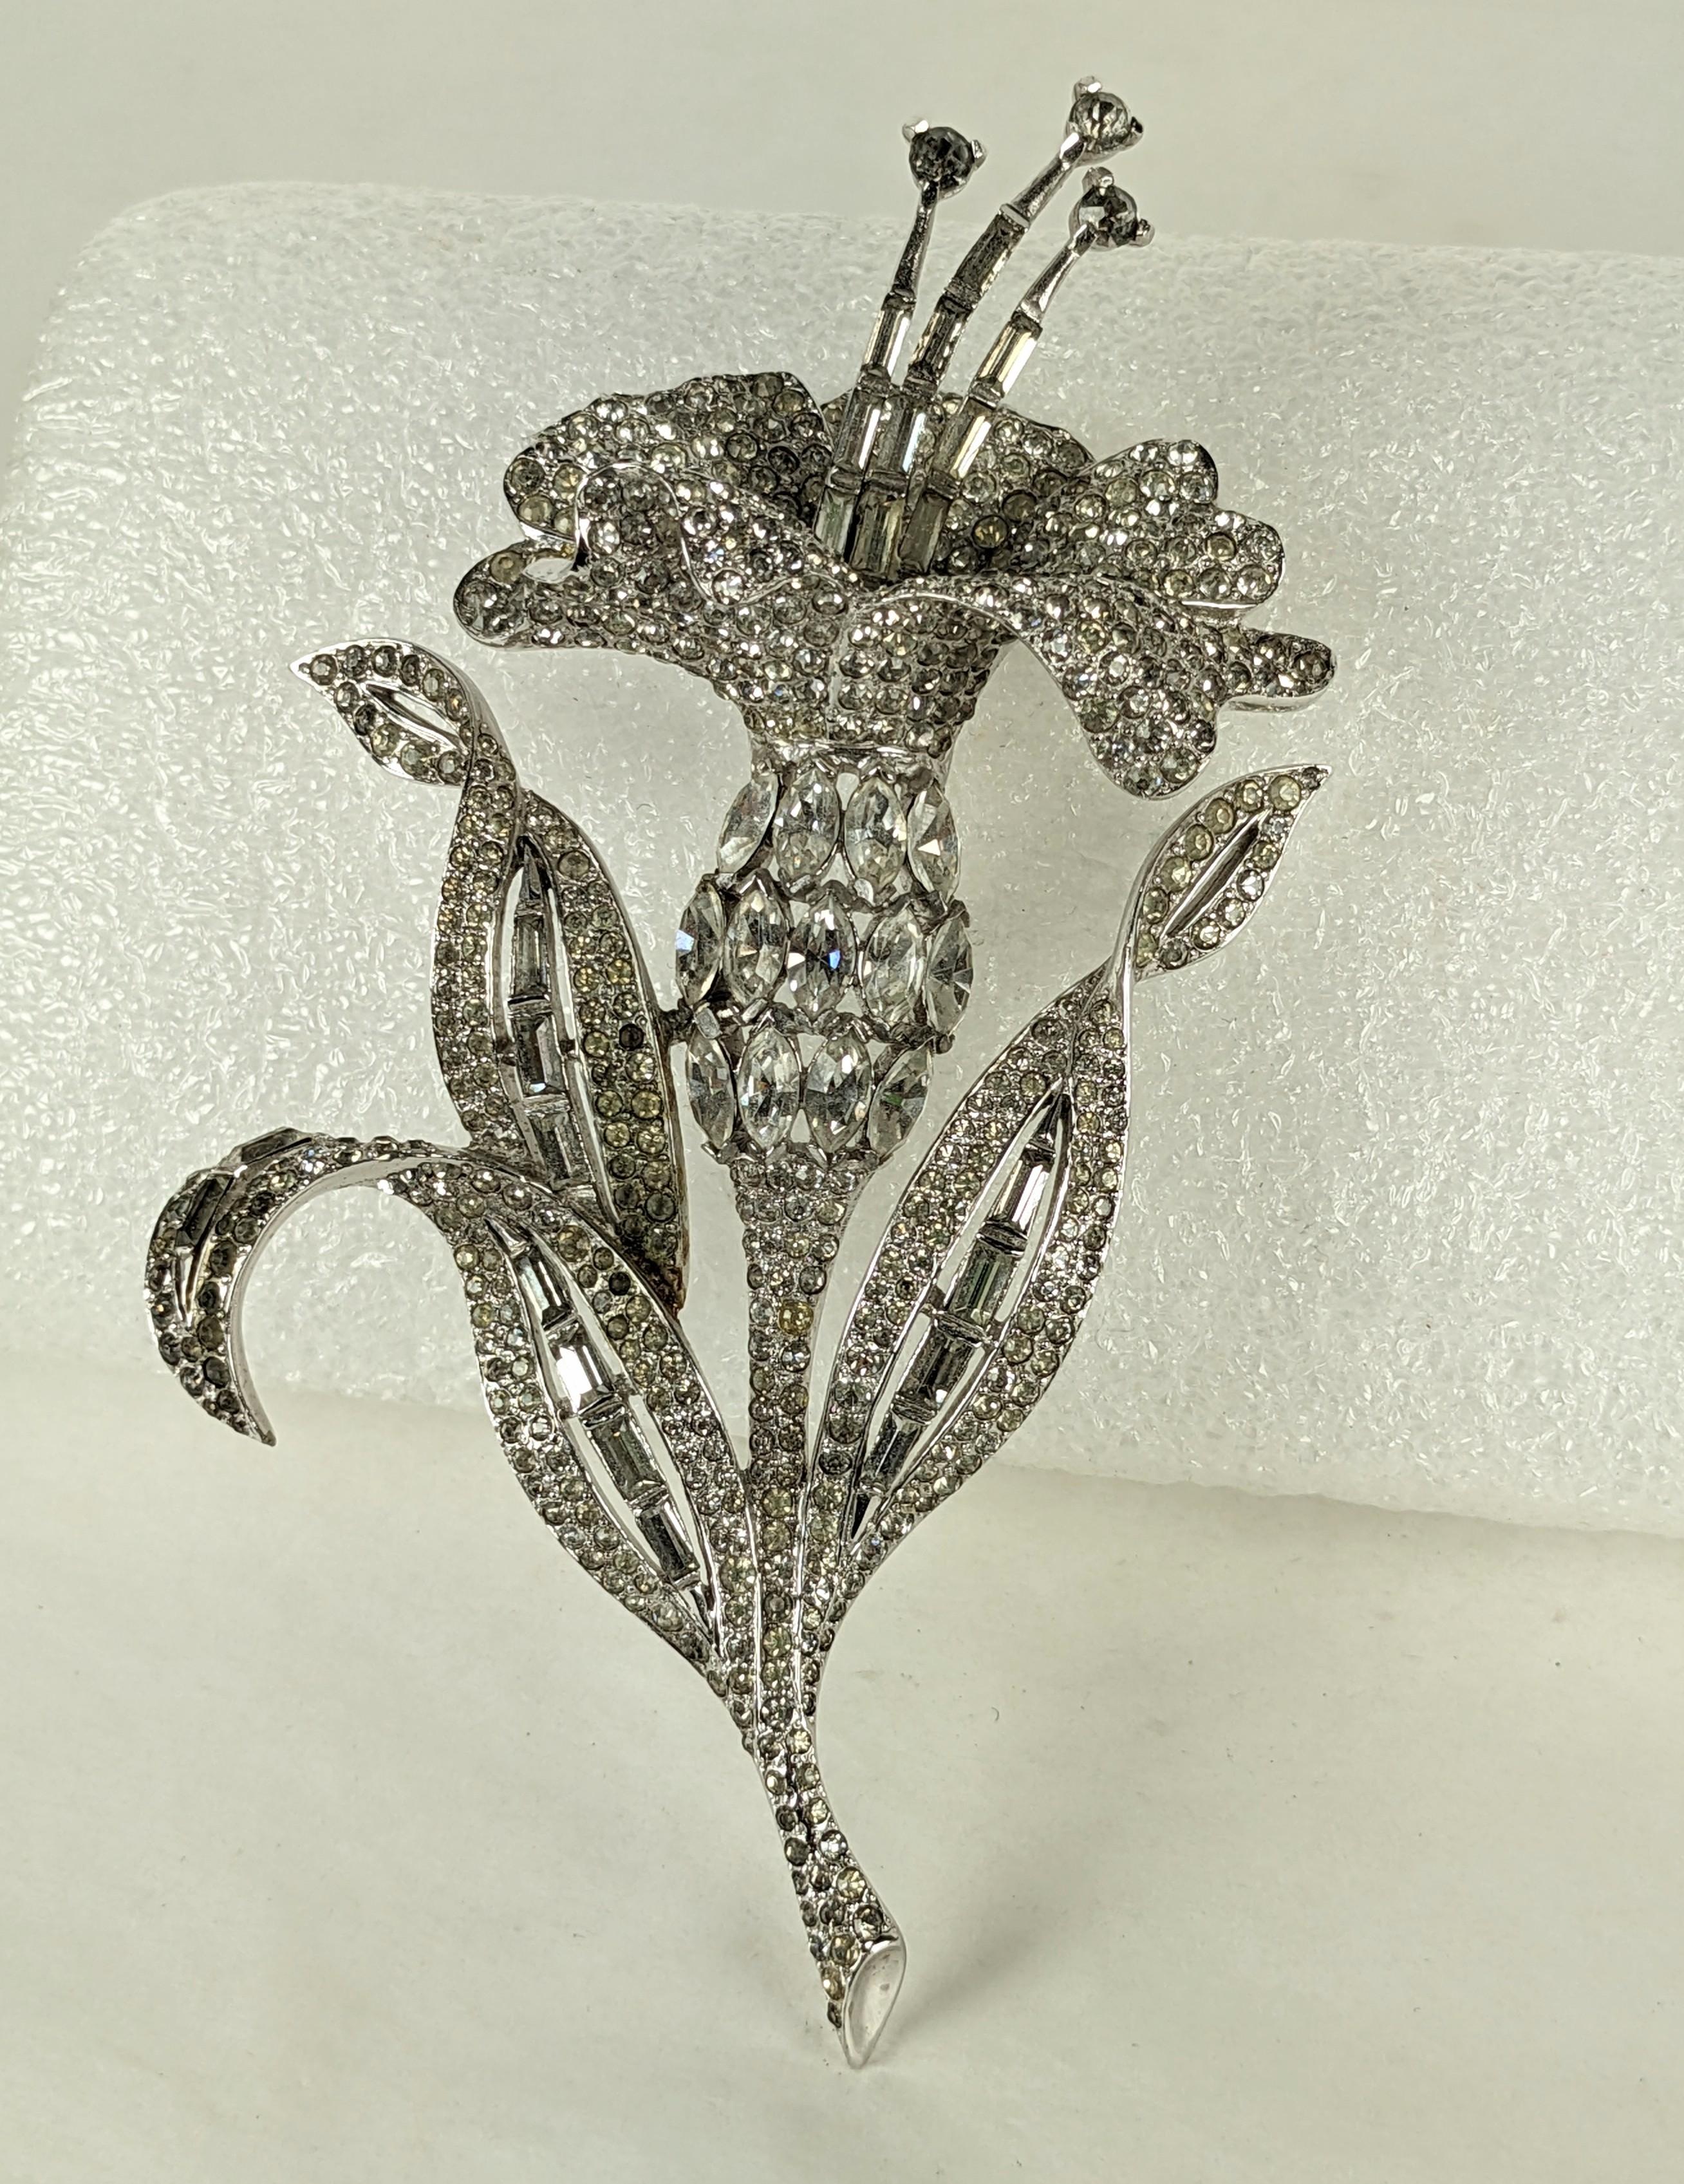 Rare and Massive Marcel Boucher Art Deco Pave Lily from the 1930's. High rhodium finish with pave rhinestones with round, baguette and navette stones. Extraordinary design from the late 1930's. Unsigned collectors piece. 1930's USA. 5